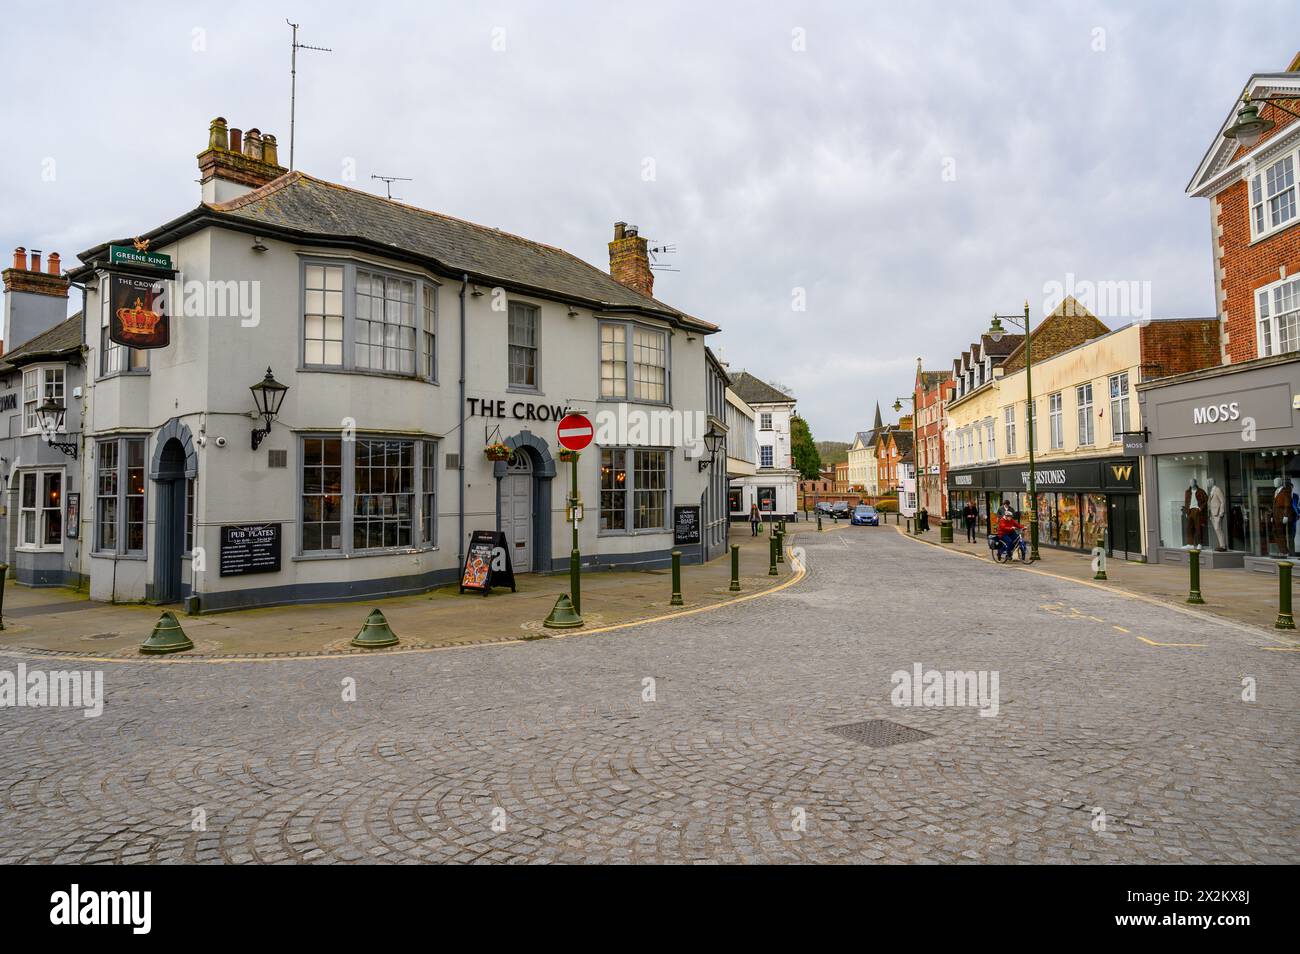 The Crown pub and Waterstones bookshop are situated on Carfax in central Horsham, a market town in West Sussex, England. Stock Photo